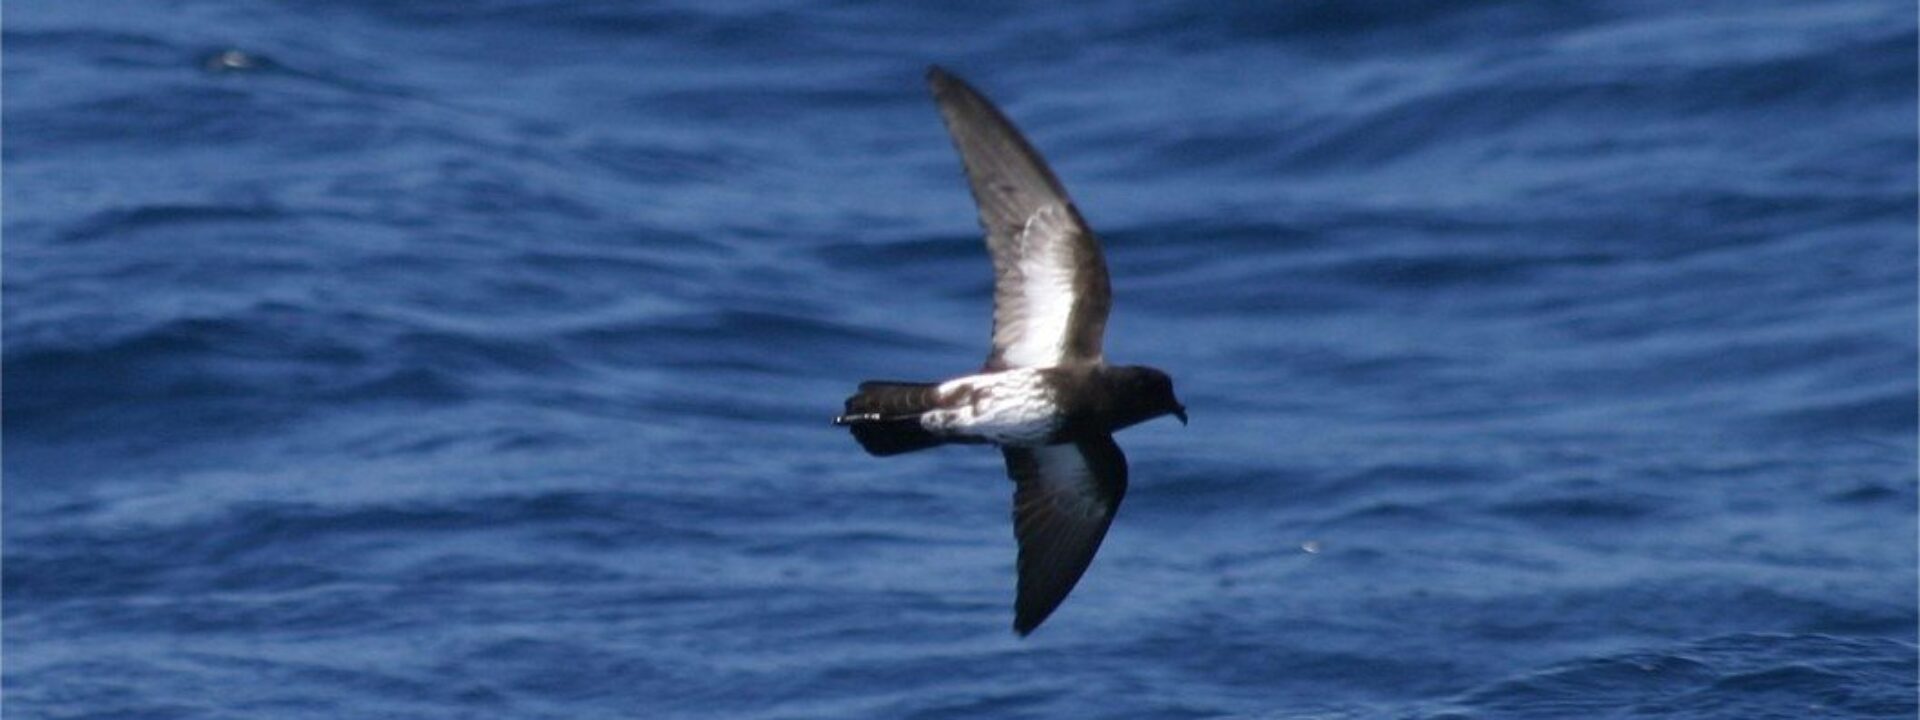 New Zealand Storm-petrel - this critically endangered bird was only rediscovered in 2003 but has been seen on every WPO voyage departing from North Island © Chris Collins